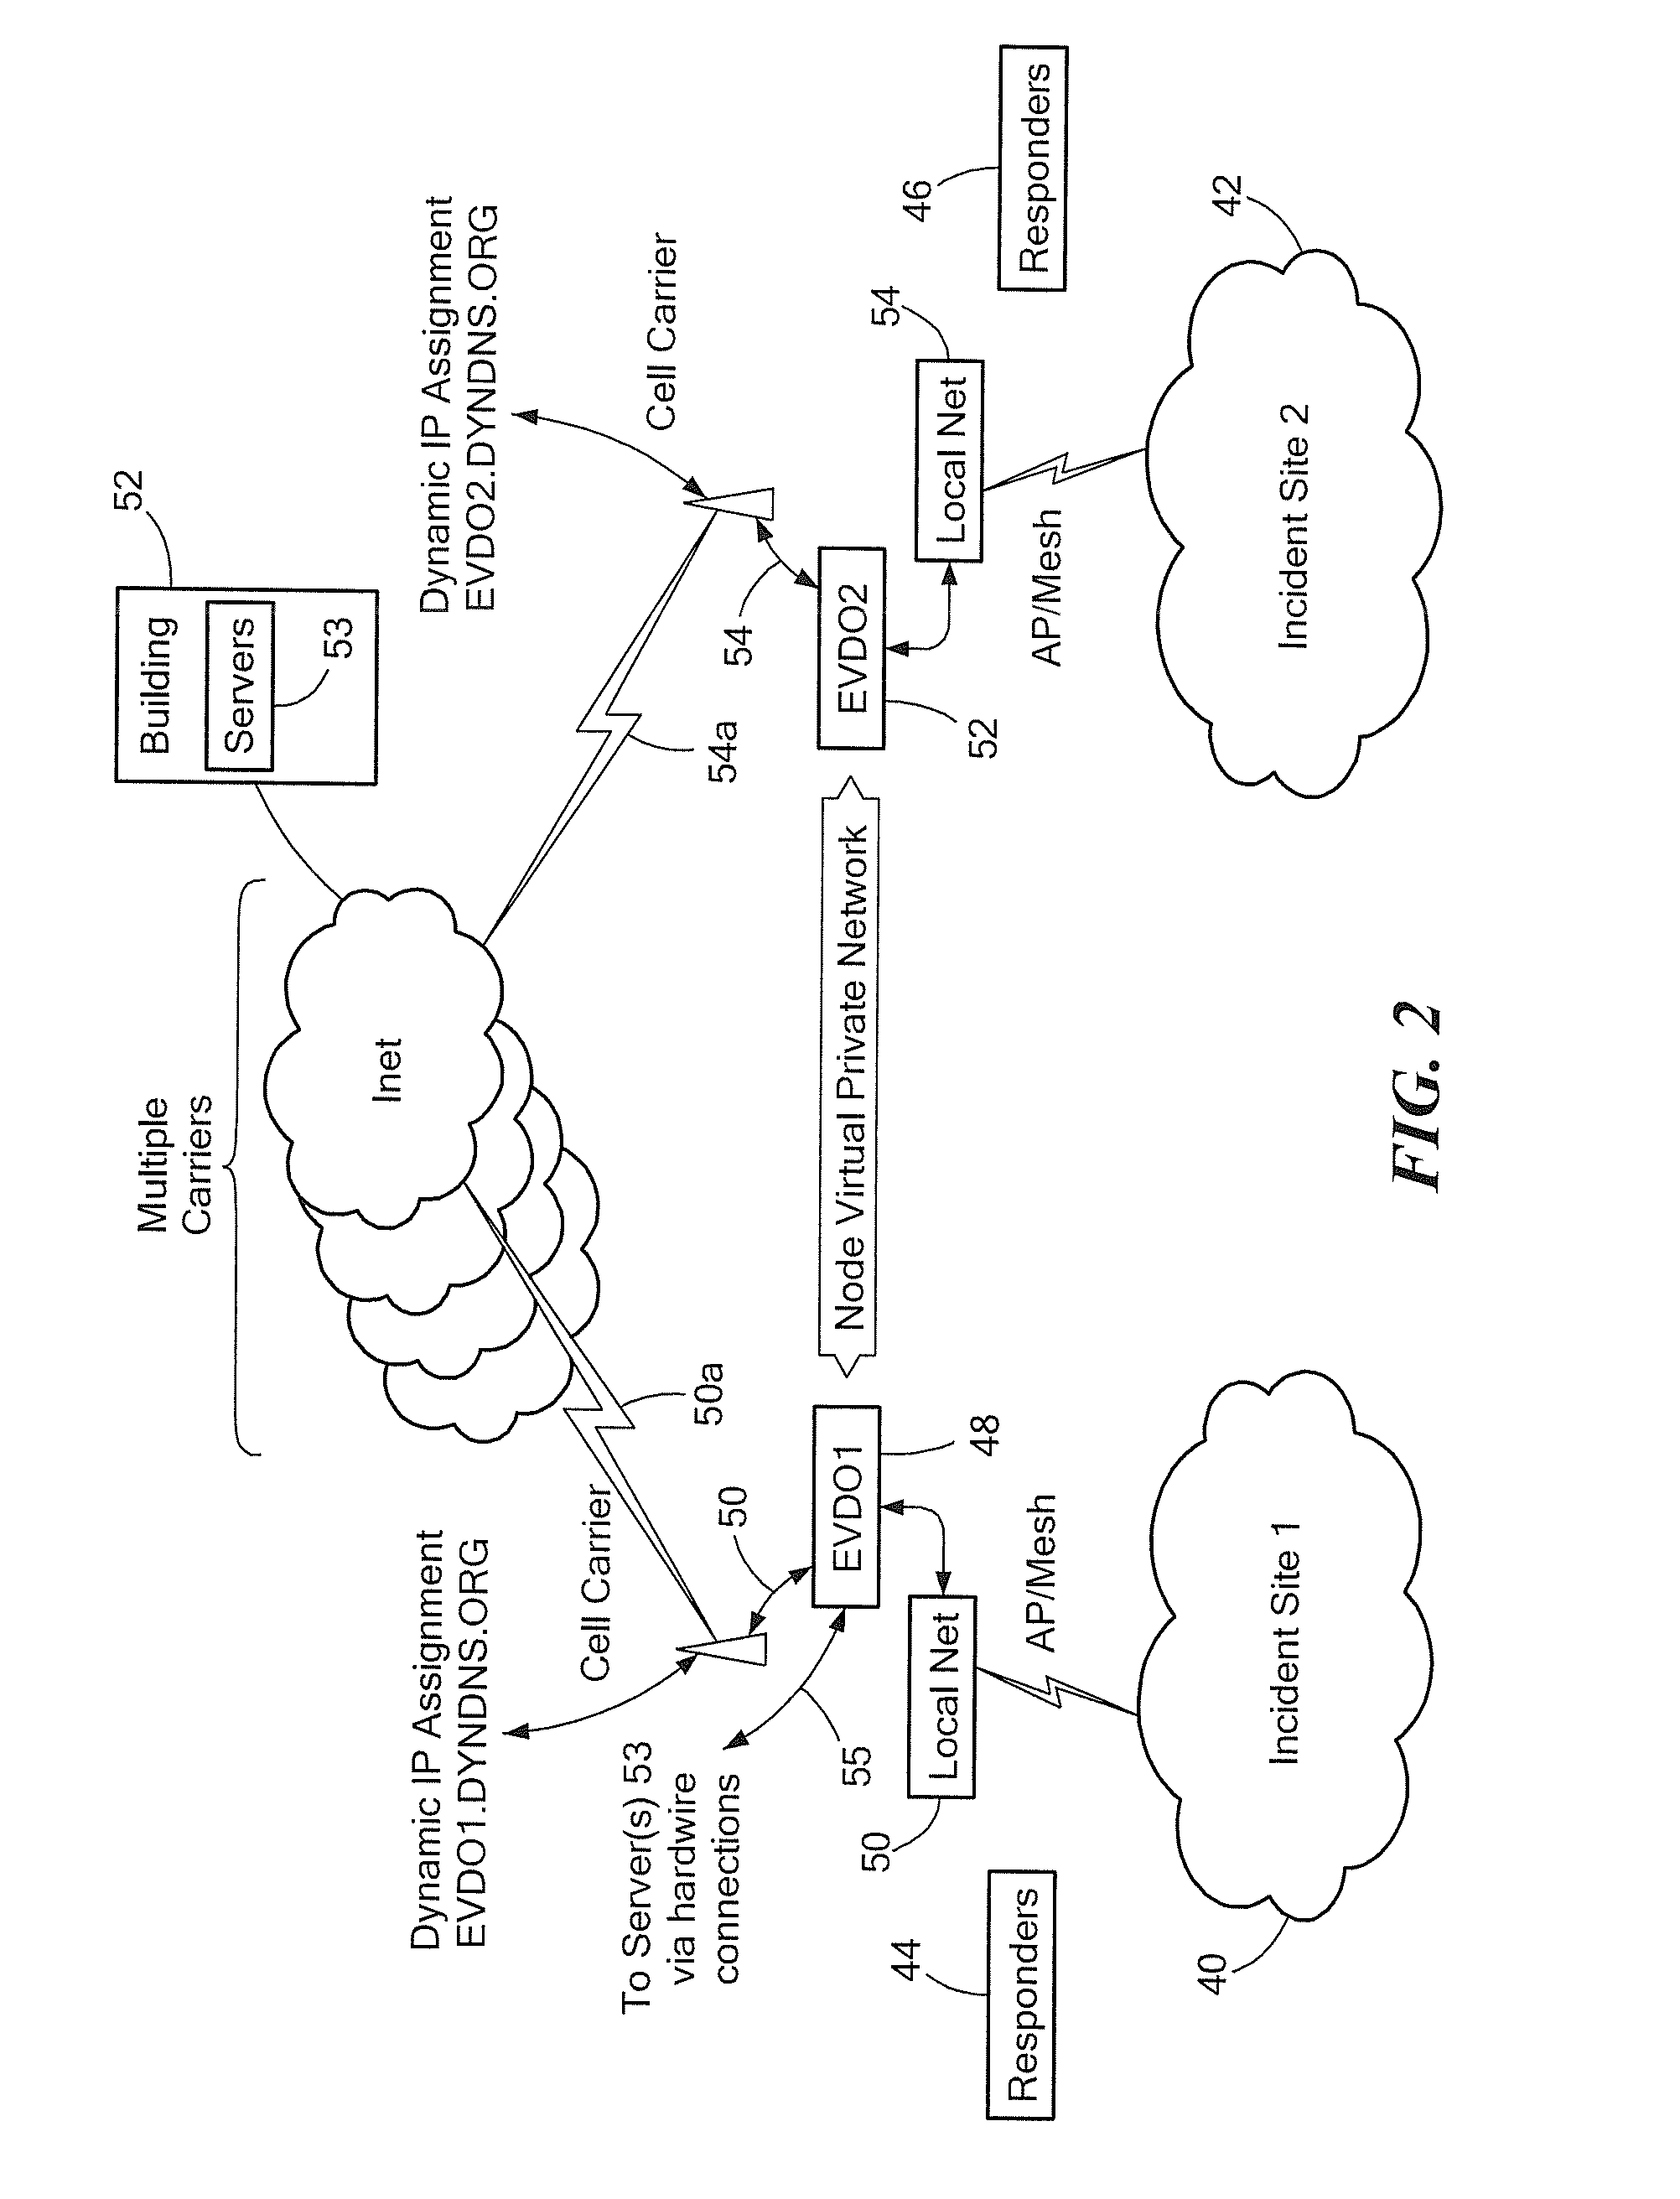 Router and rapid response network